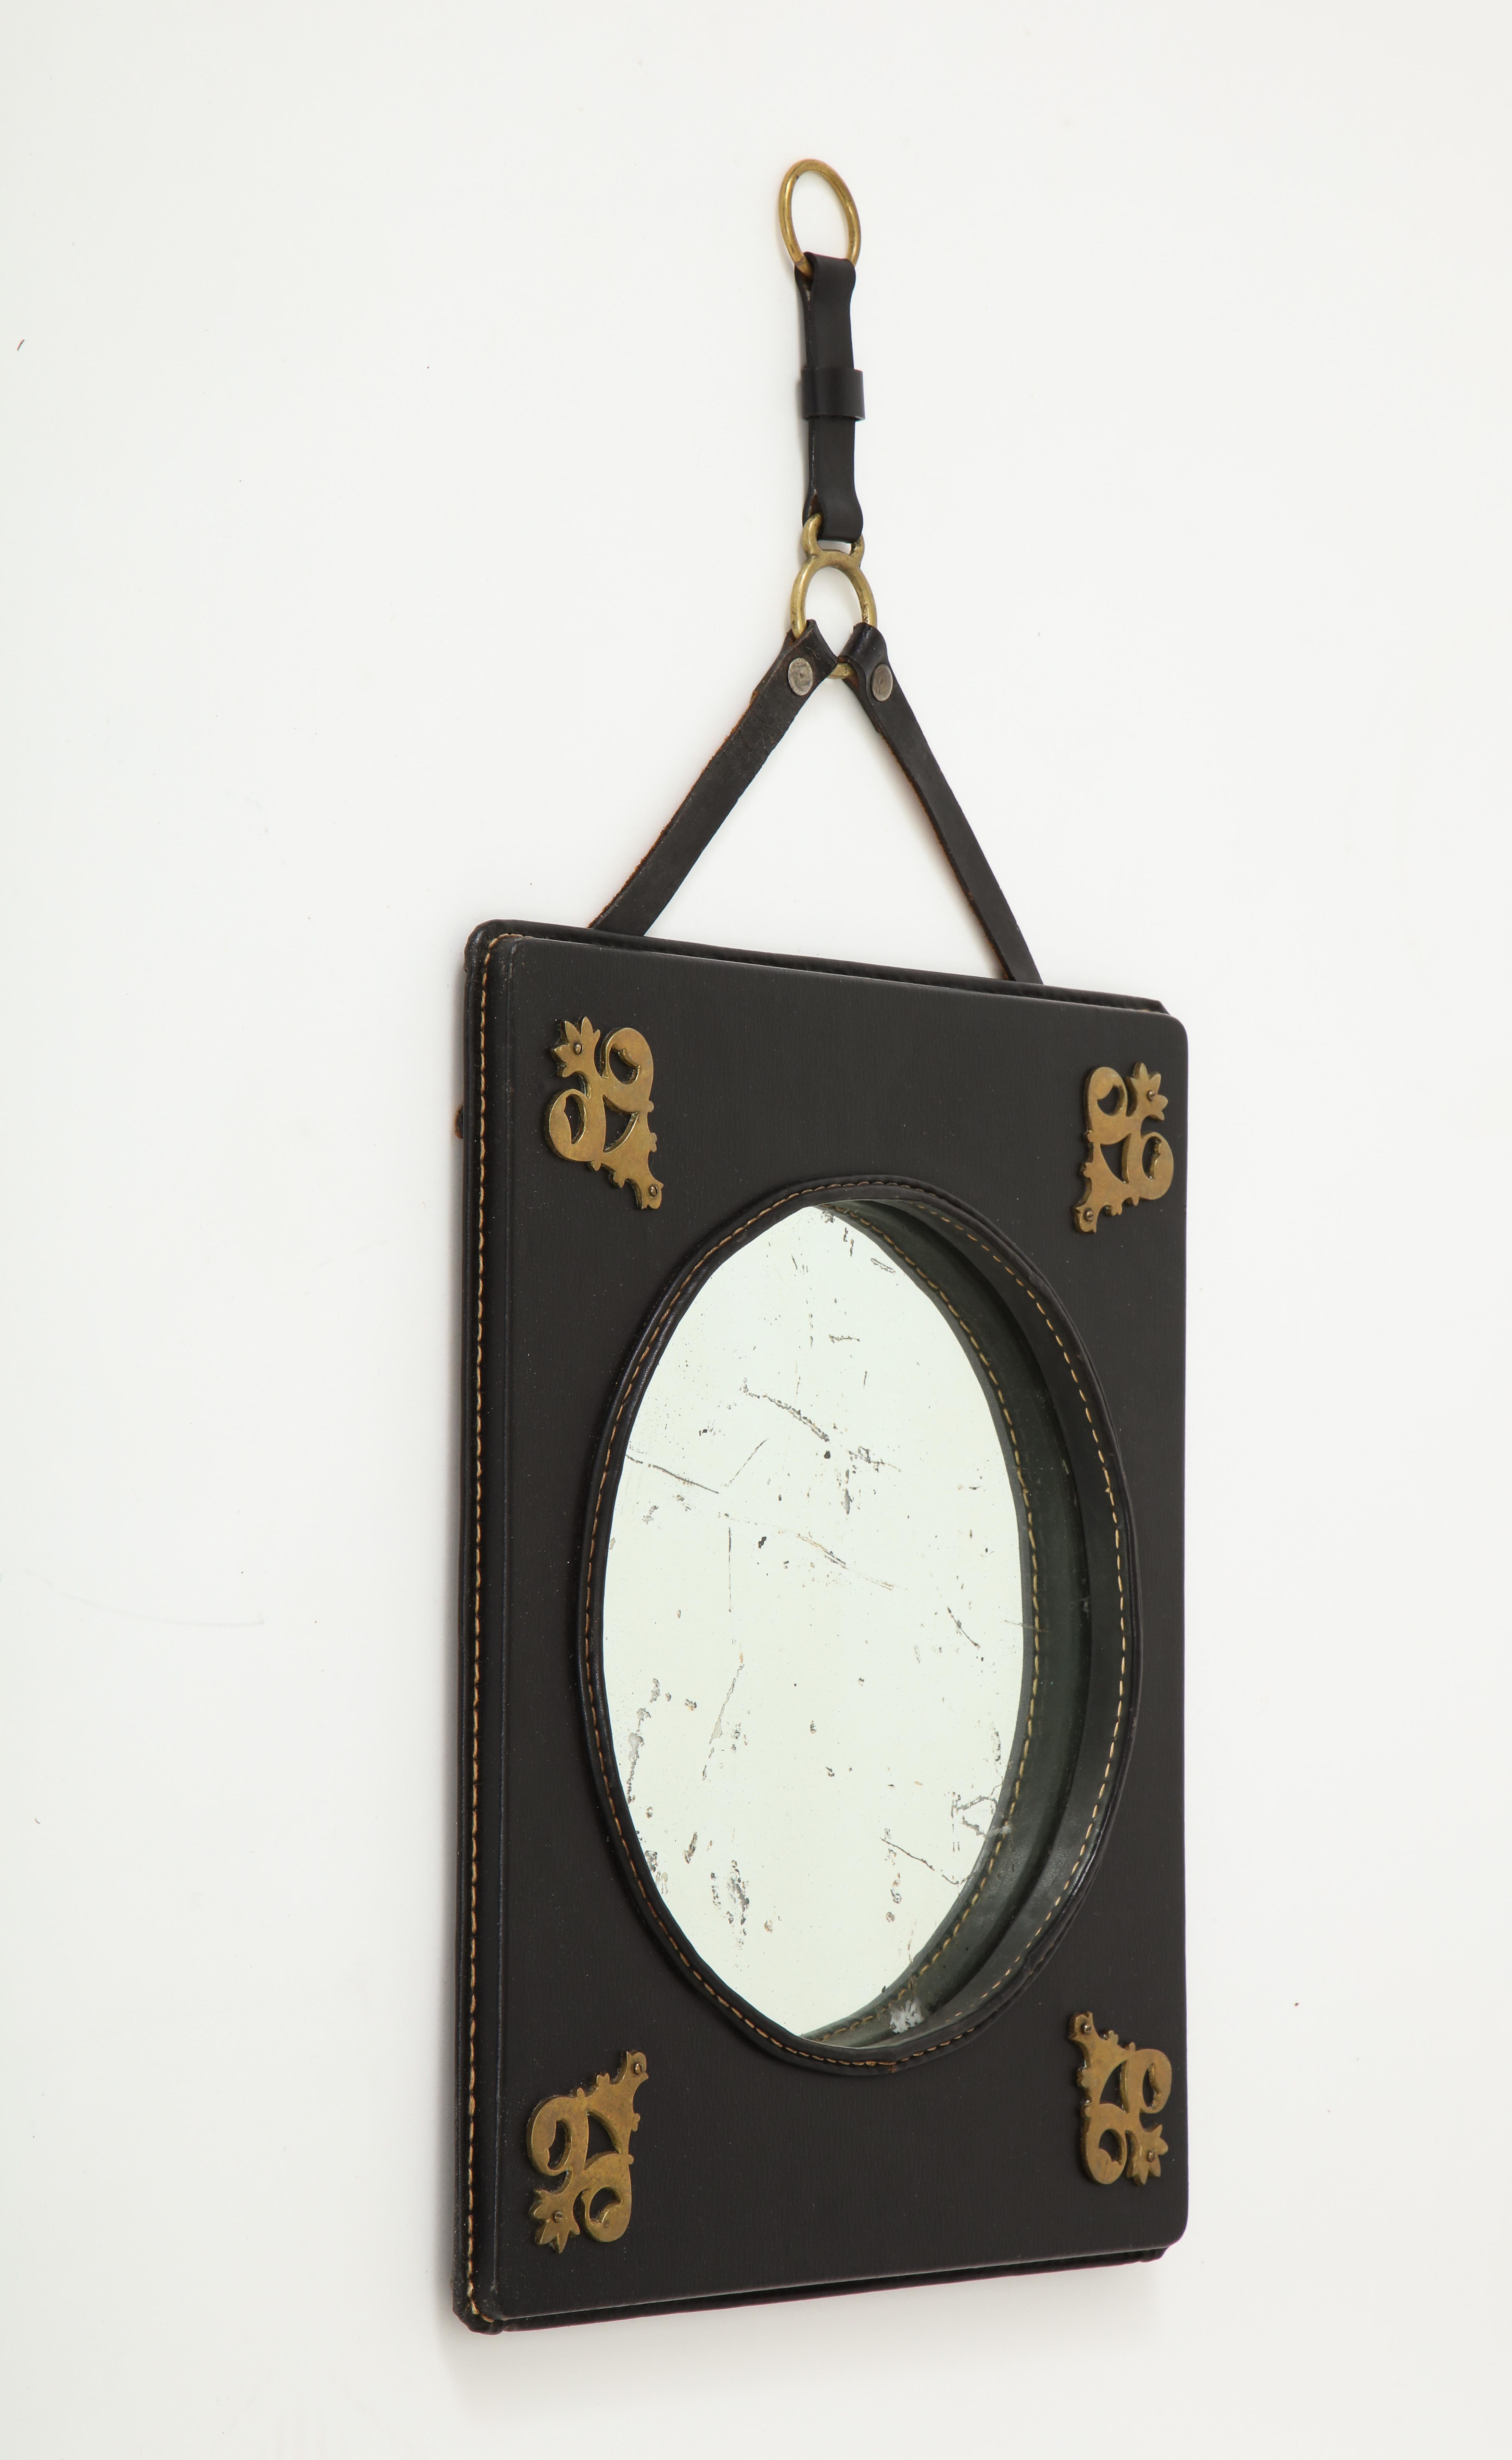 Stitched leather mirror by Jacques Adnet
1950s
France
Possibility of a second one to make a pair
Price given for one.